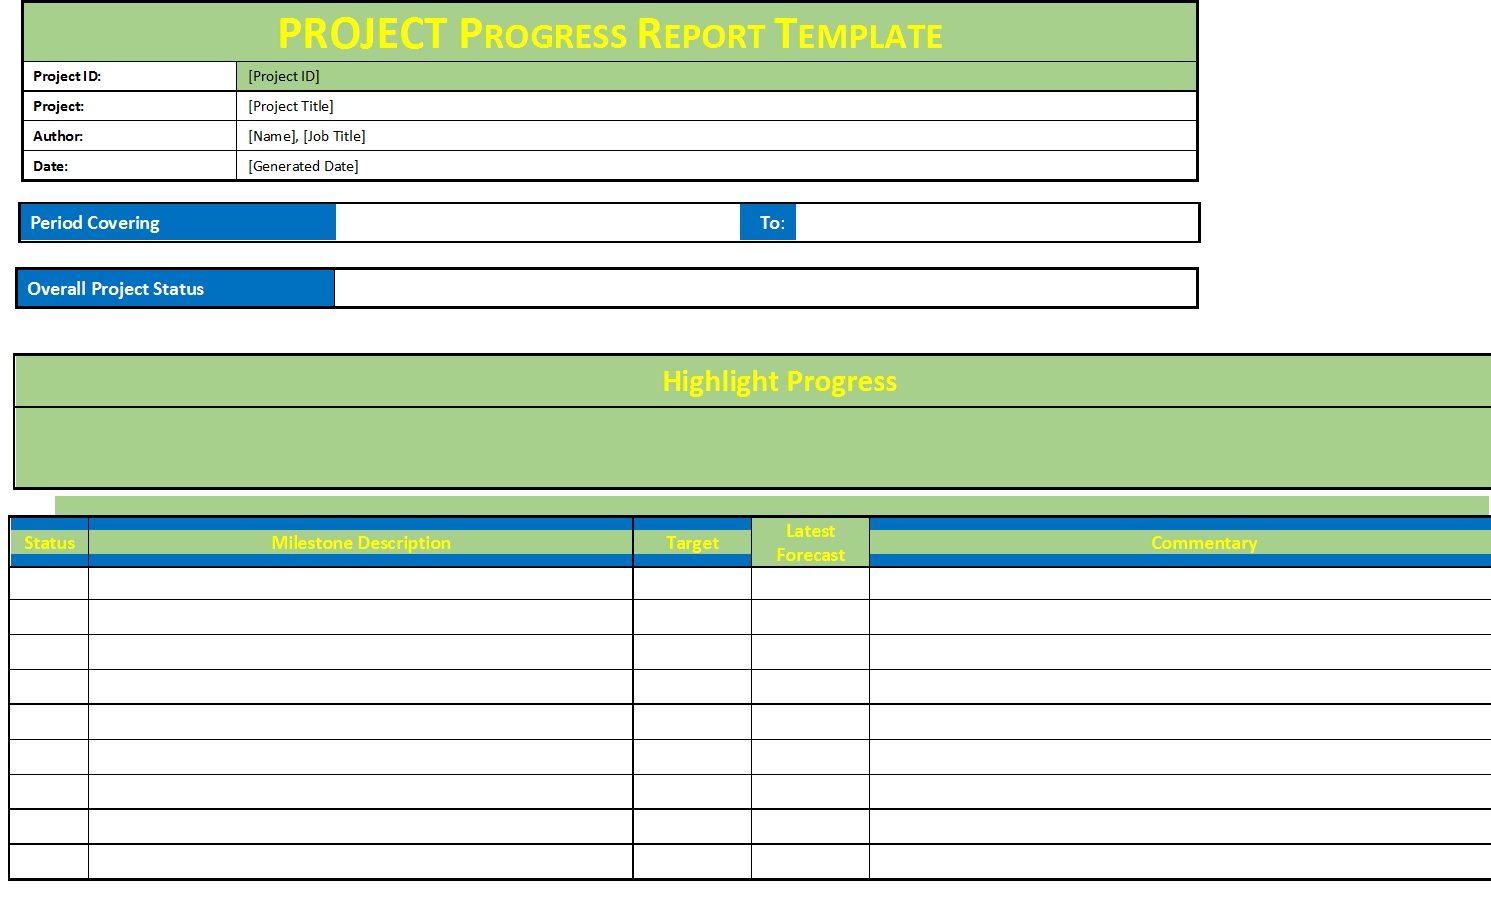 Project Progress Report Template (PPR) – Free Report Templates With Progress Report Template For Construction Project